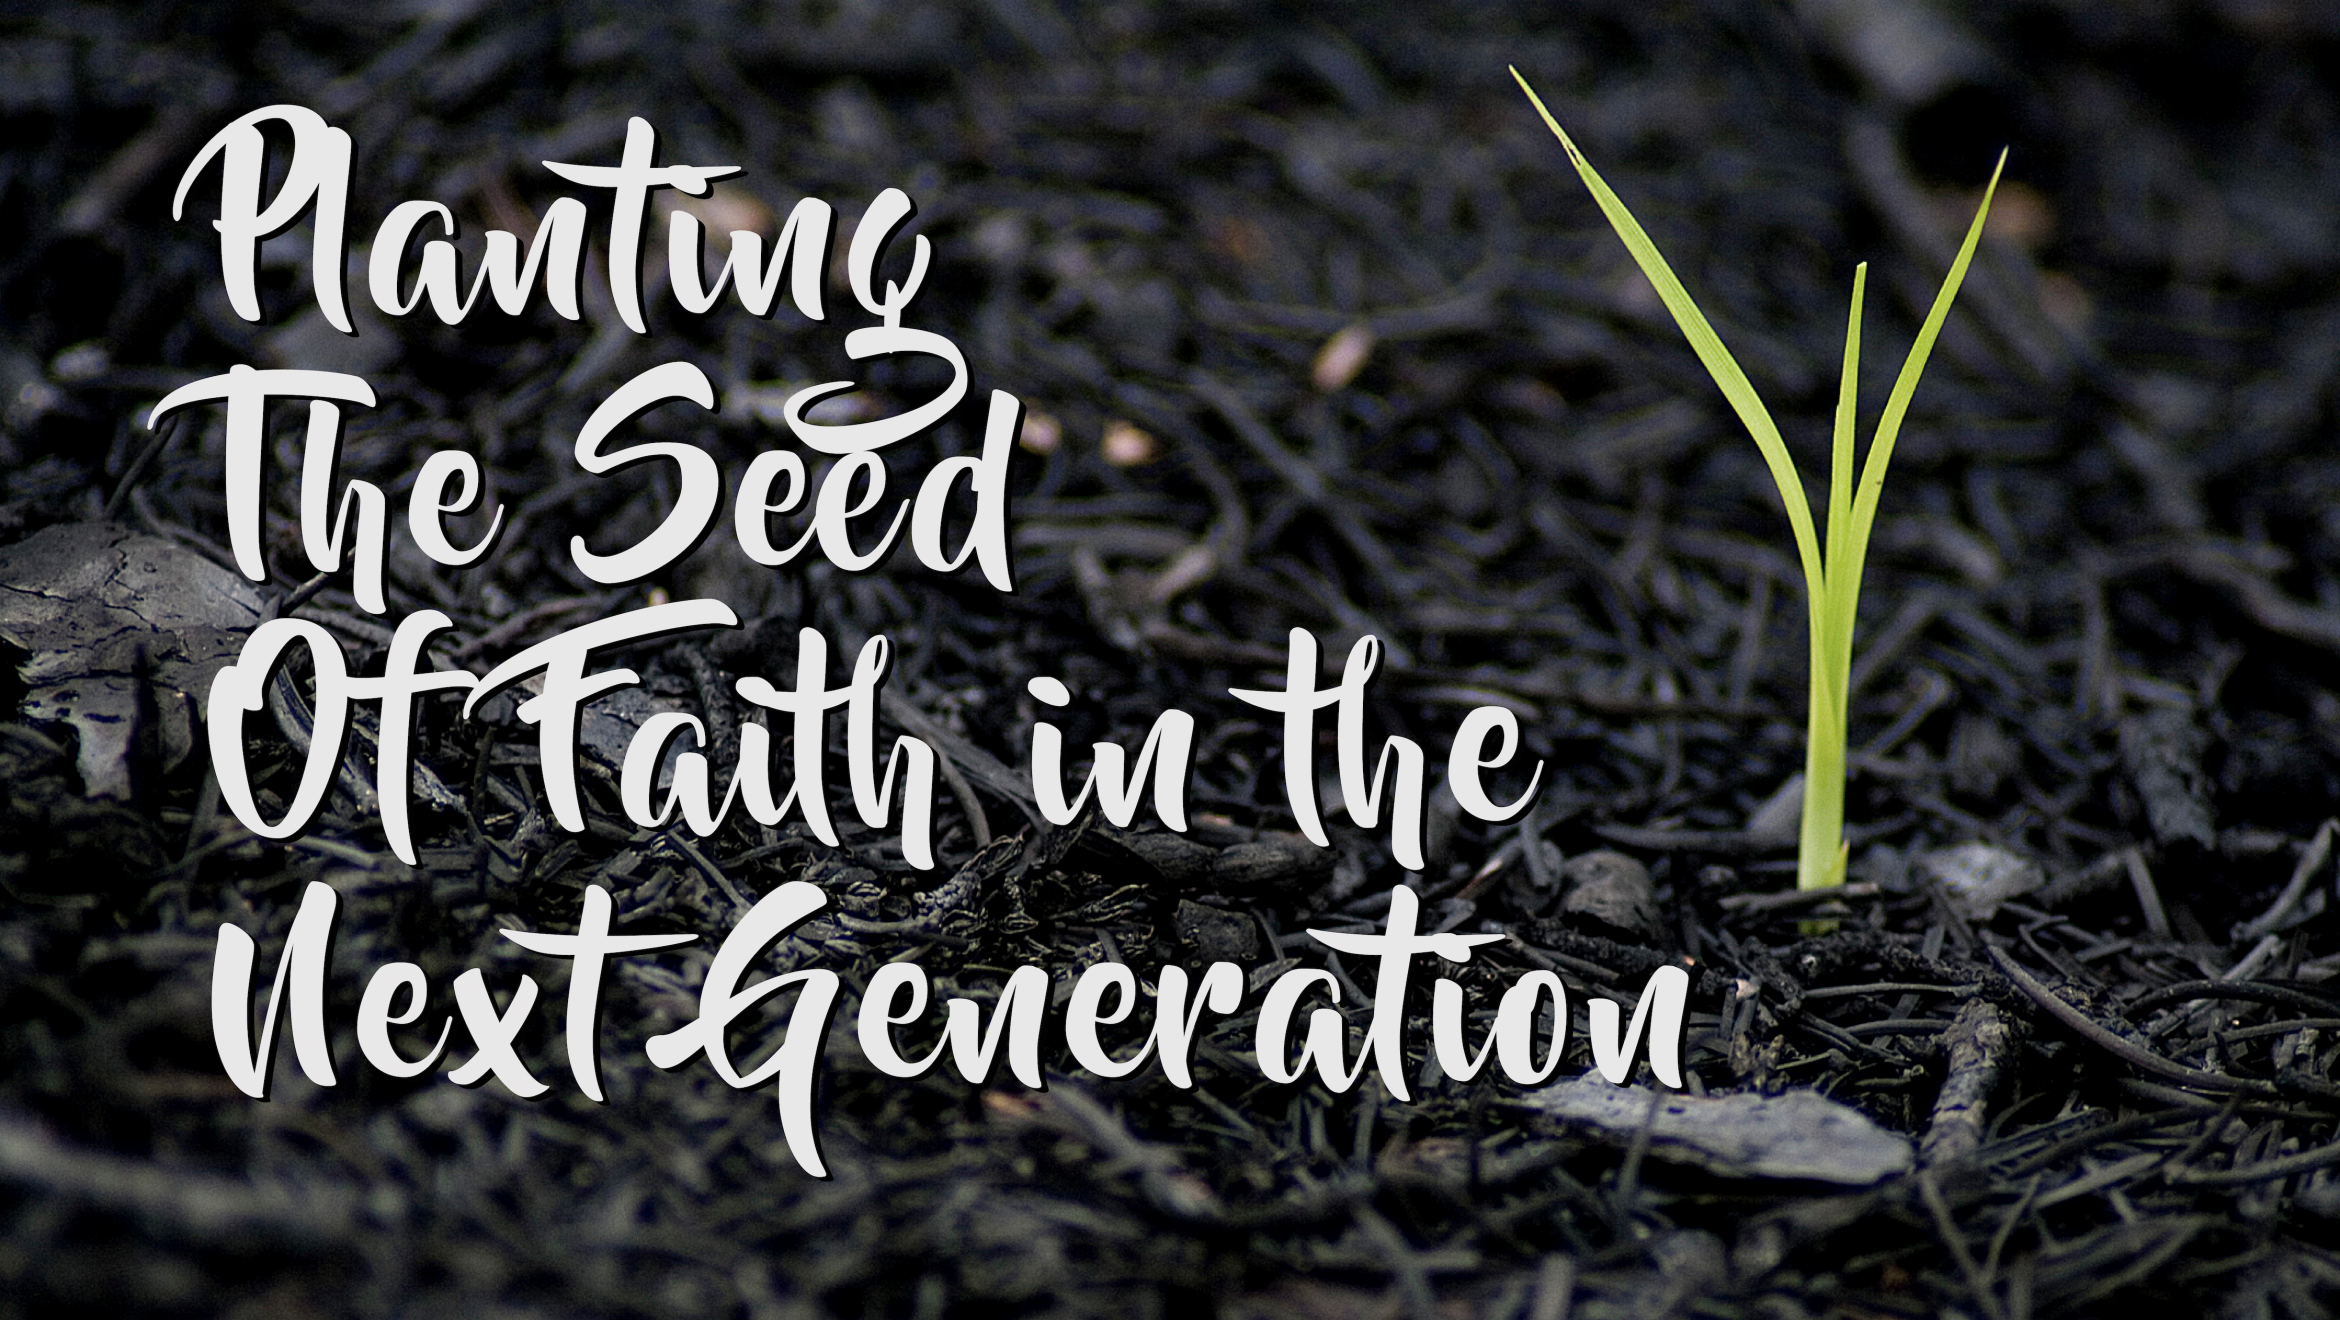 Planting The Seed of Faith in the Next Generation